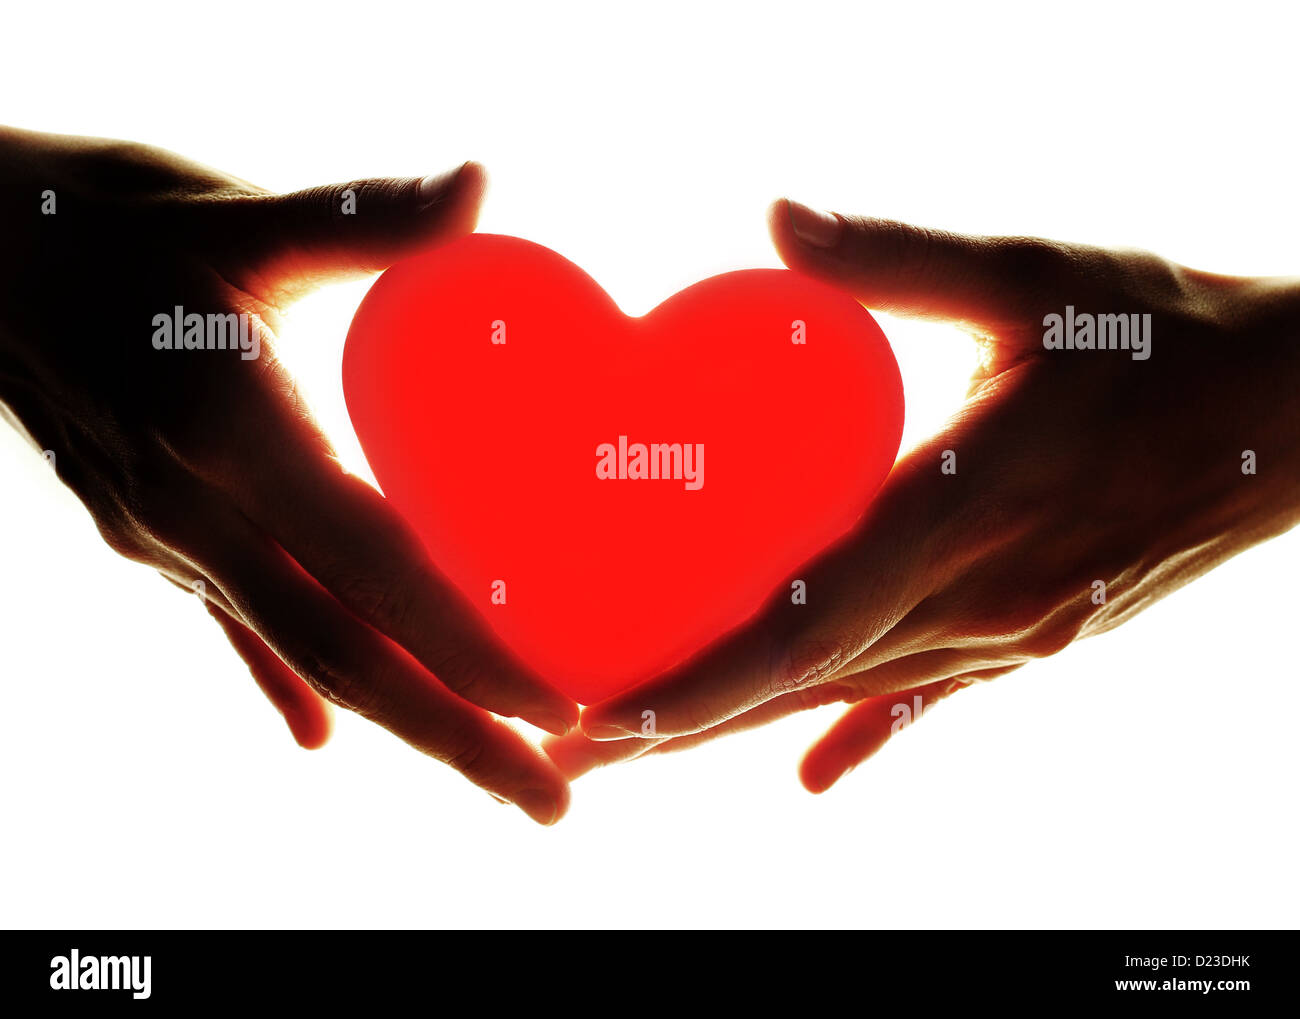 Two hands holding red heart, lightened for behind Stock Photo